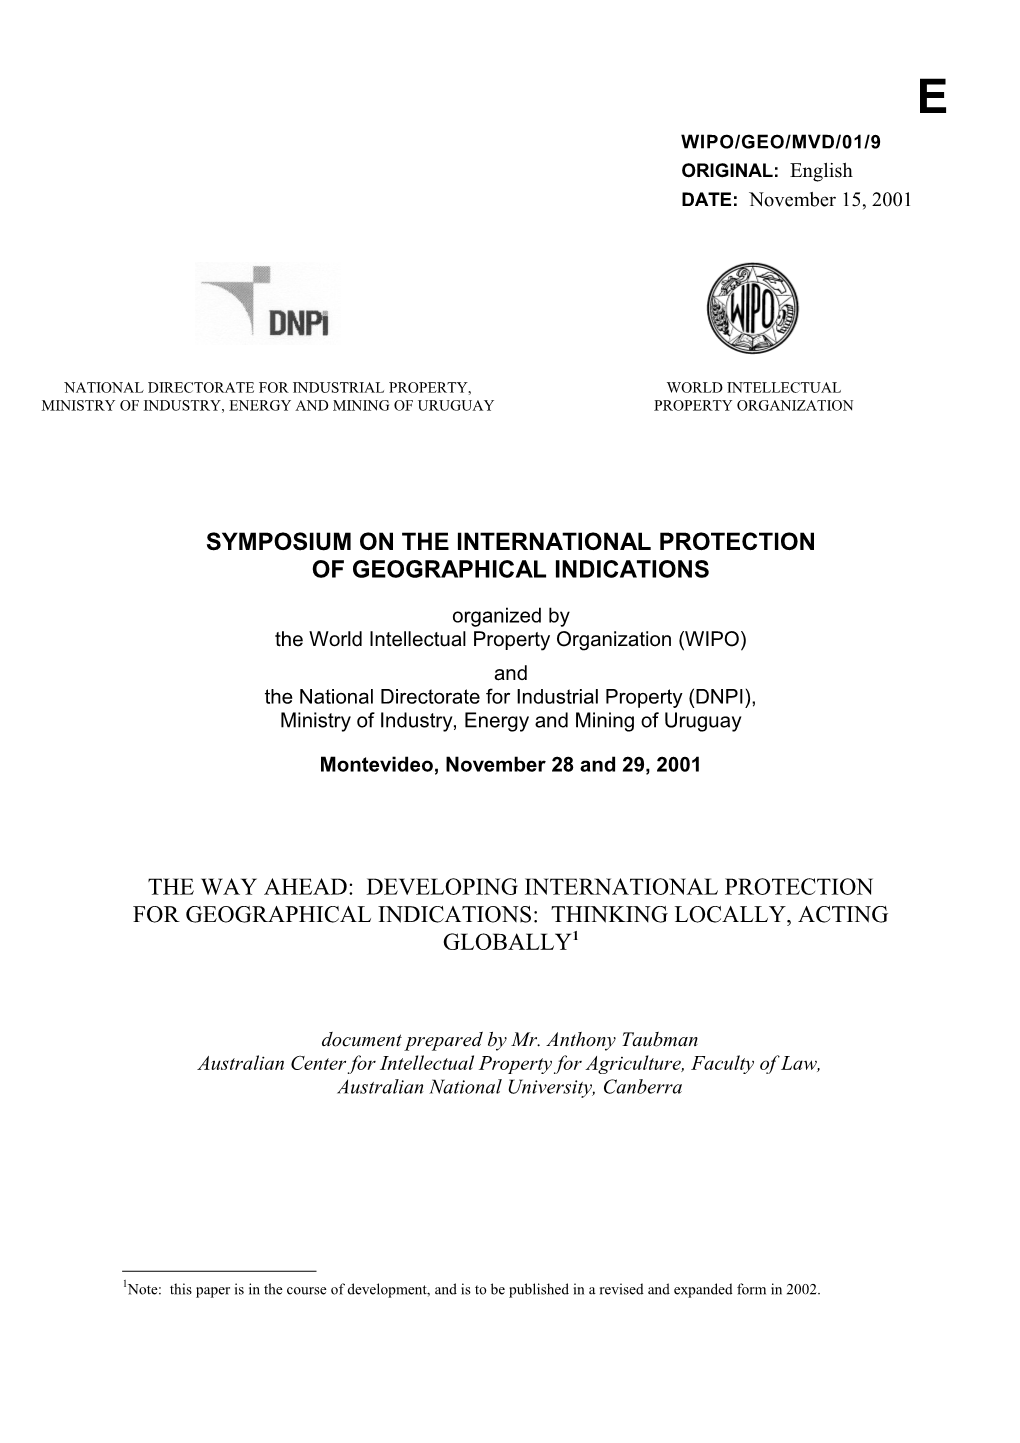 WIPO/GEO/MVD/01/9: the Way Ahead: Developing International Protection for Geographical